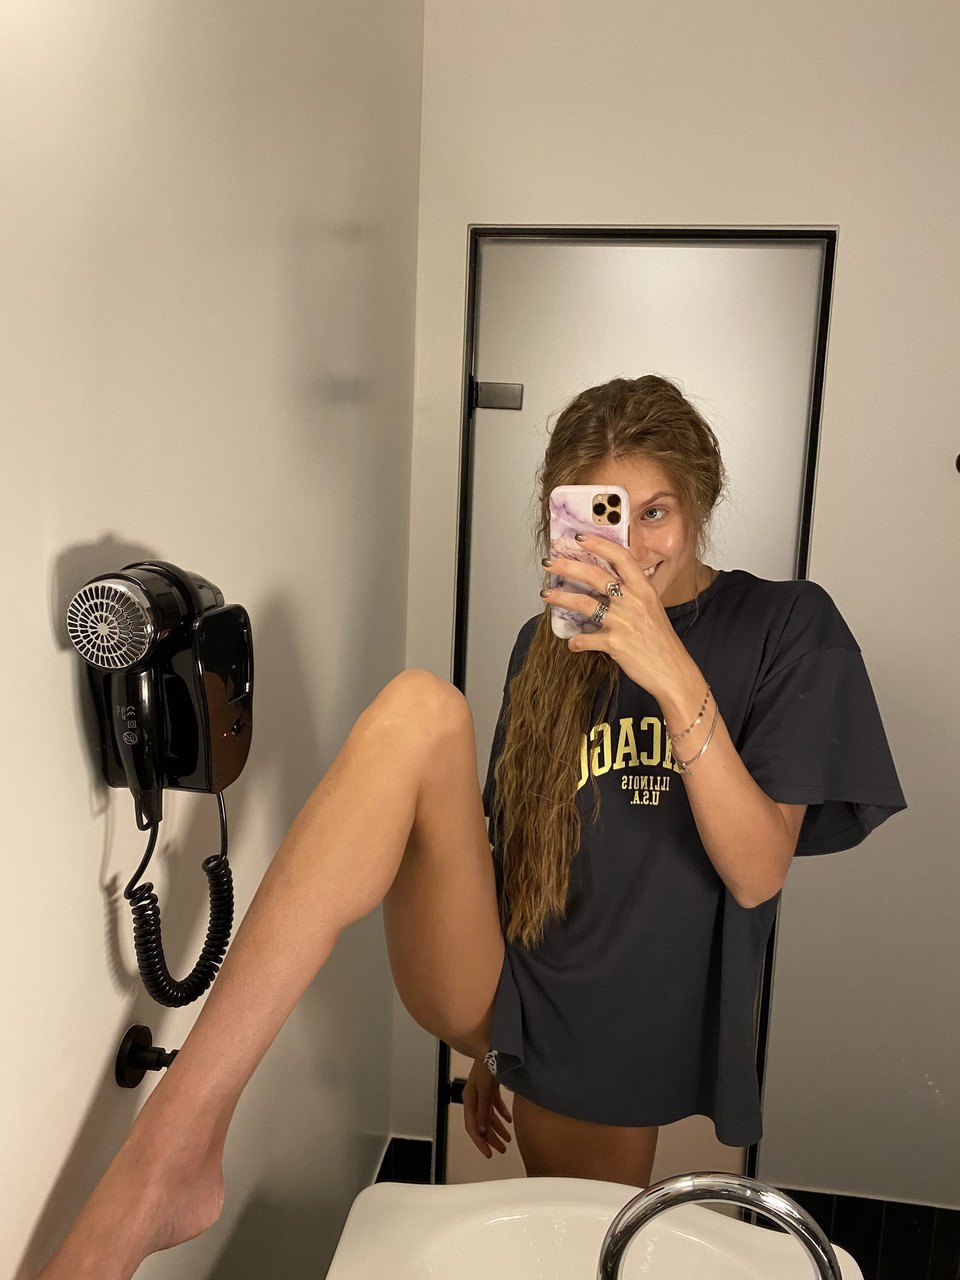 Skinny babe takes nude selfies showing her tiny tits and her tight ass photo porno #423874984 | OnlyFans JasminJass Pics, Homemade, porno mobile